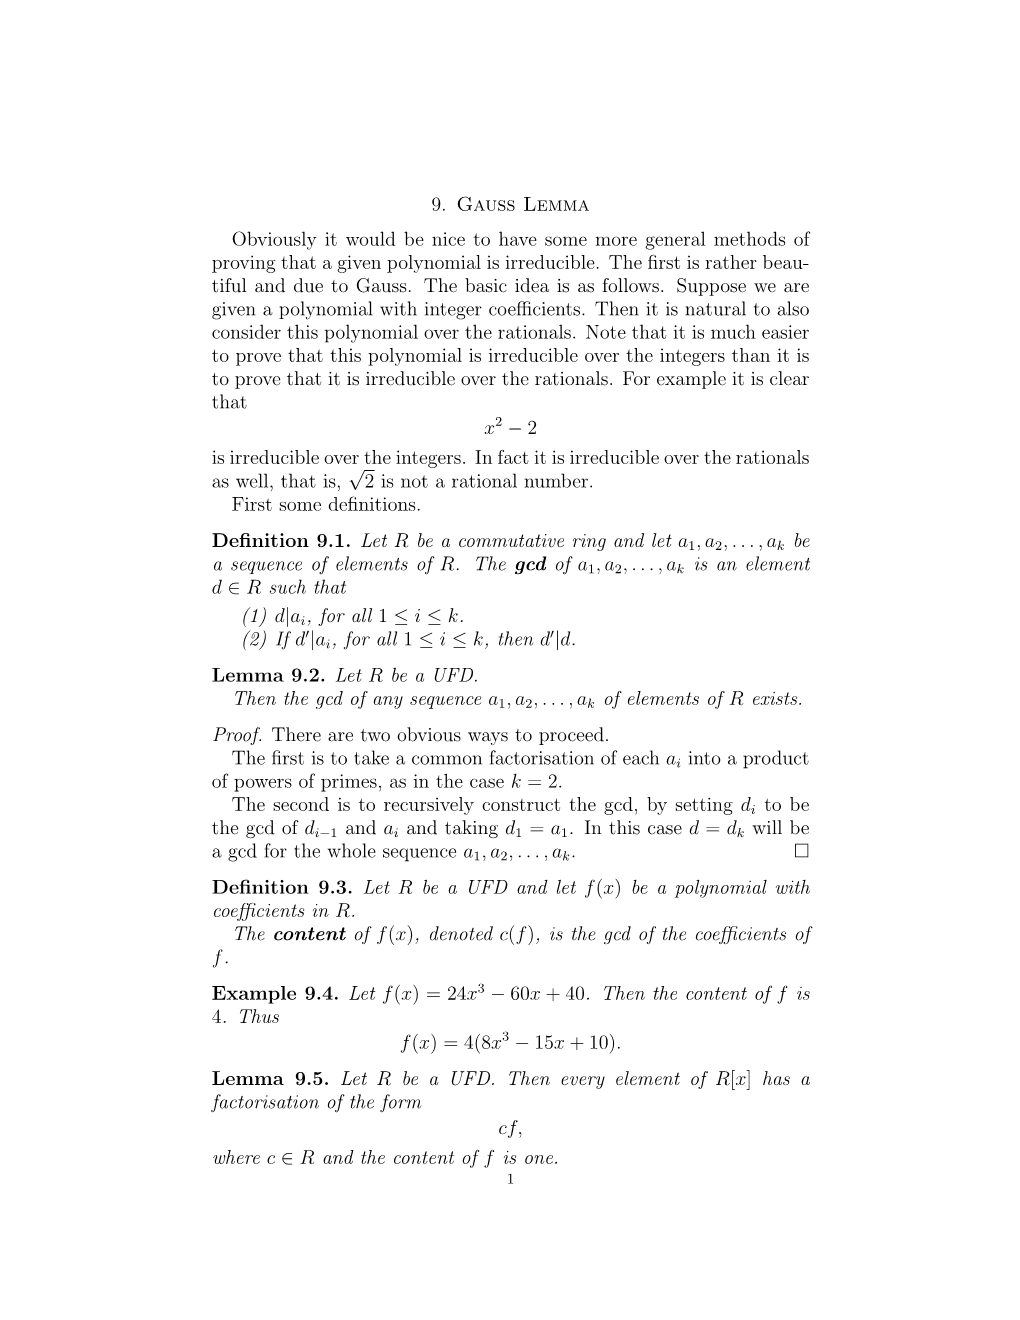 9. Gauss Lemma Obviously It Would Be Nice to Have Some More General Methods of Proving That a Given Polynomial Is Irreducible. T